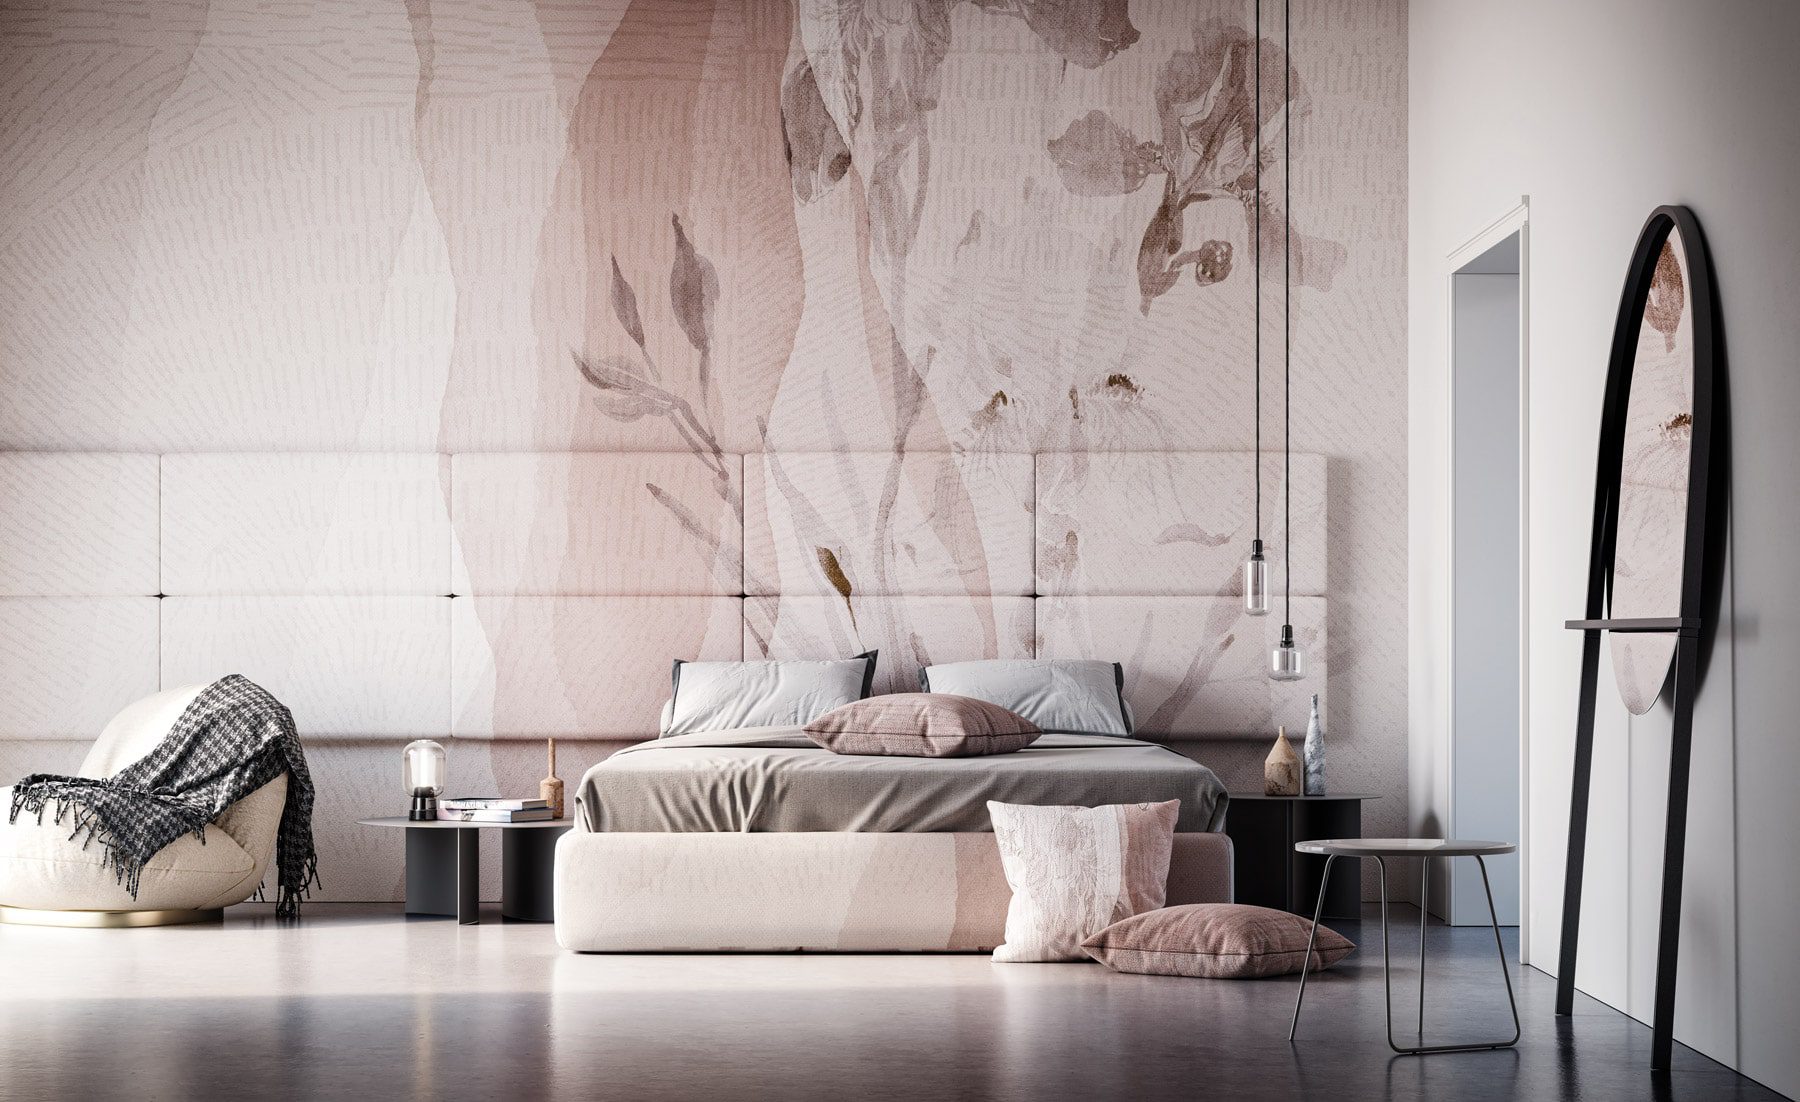 Bedroom Wallpaper is much more than just a decorative element. Discover our refined collections and choose your Wallpaper for the Bedroom